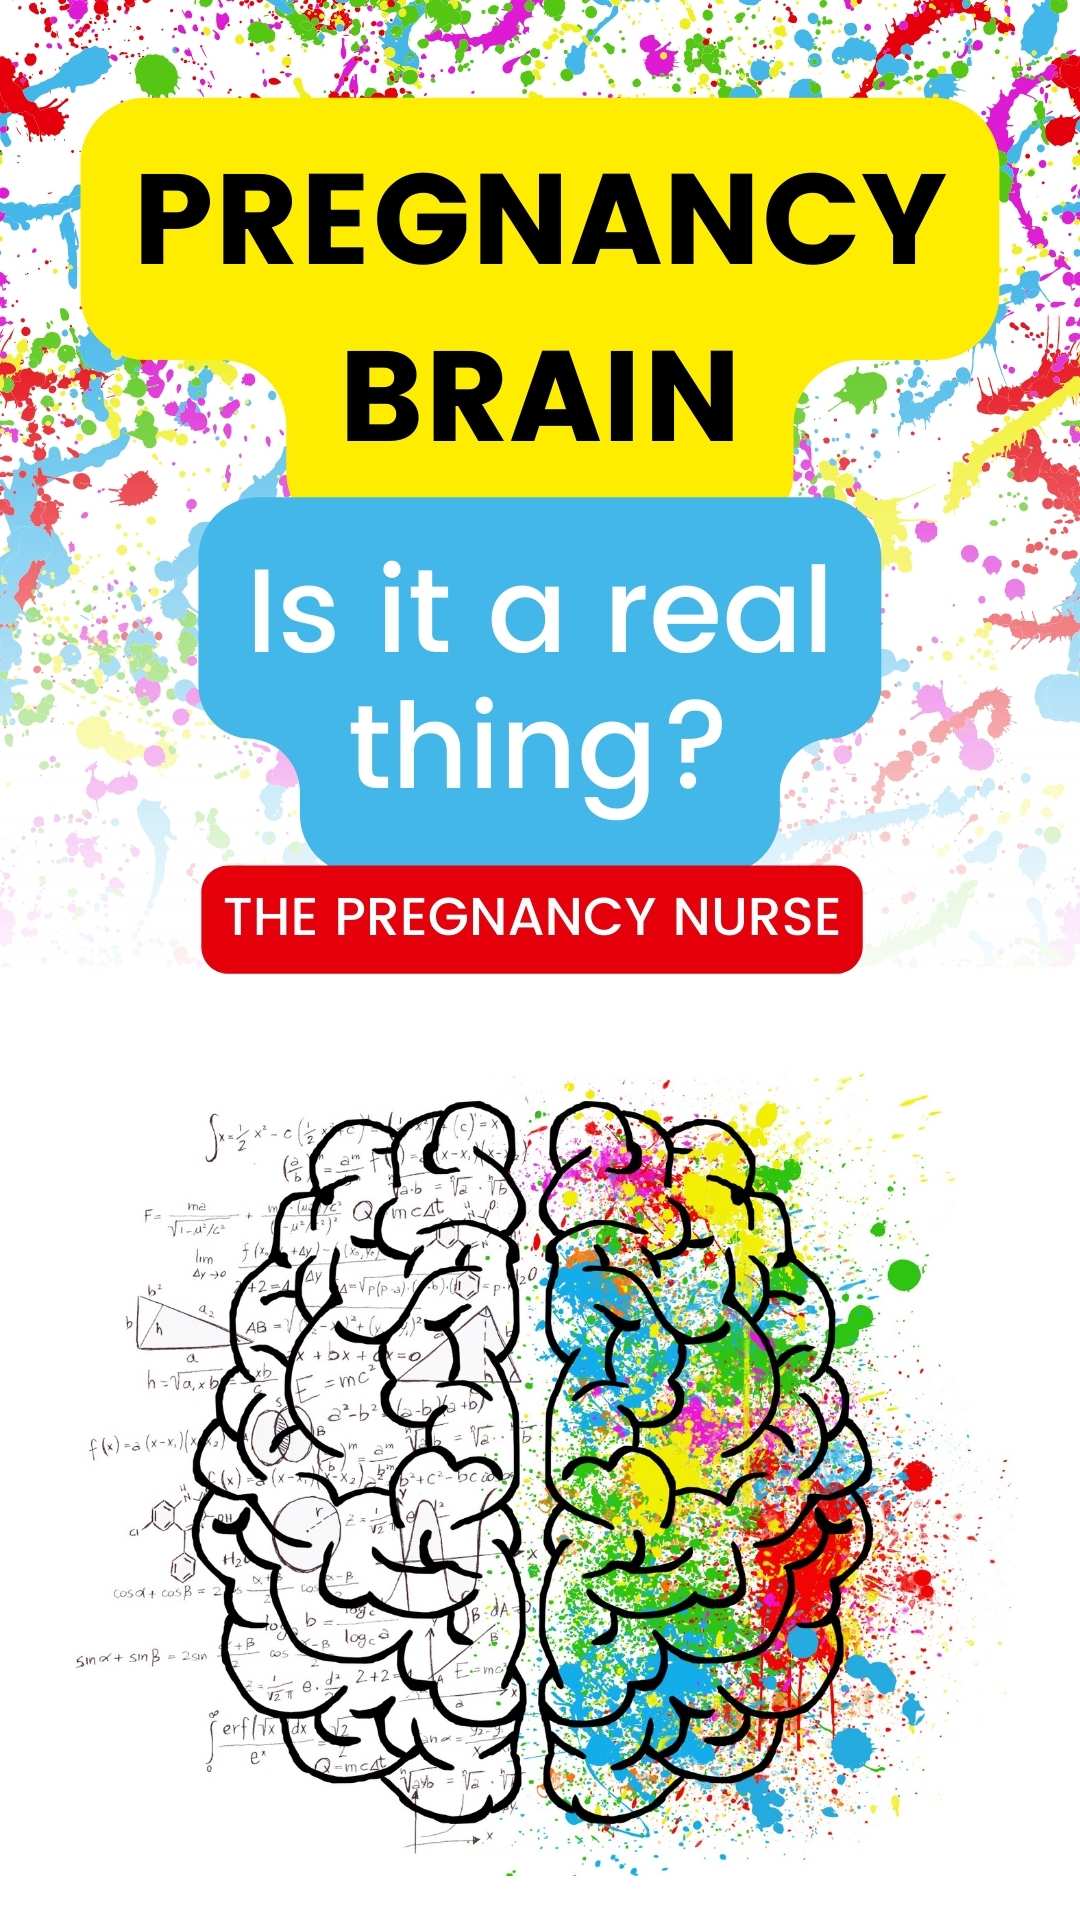 Do you feel like you have less brain function now that you're pregnant? You're not alone! Learn all about pregnancy brain- when does it start, what are the symptoms and will it go away postpartum? This helpful guide has everything you need to know.